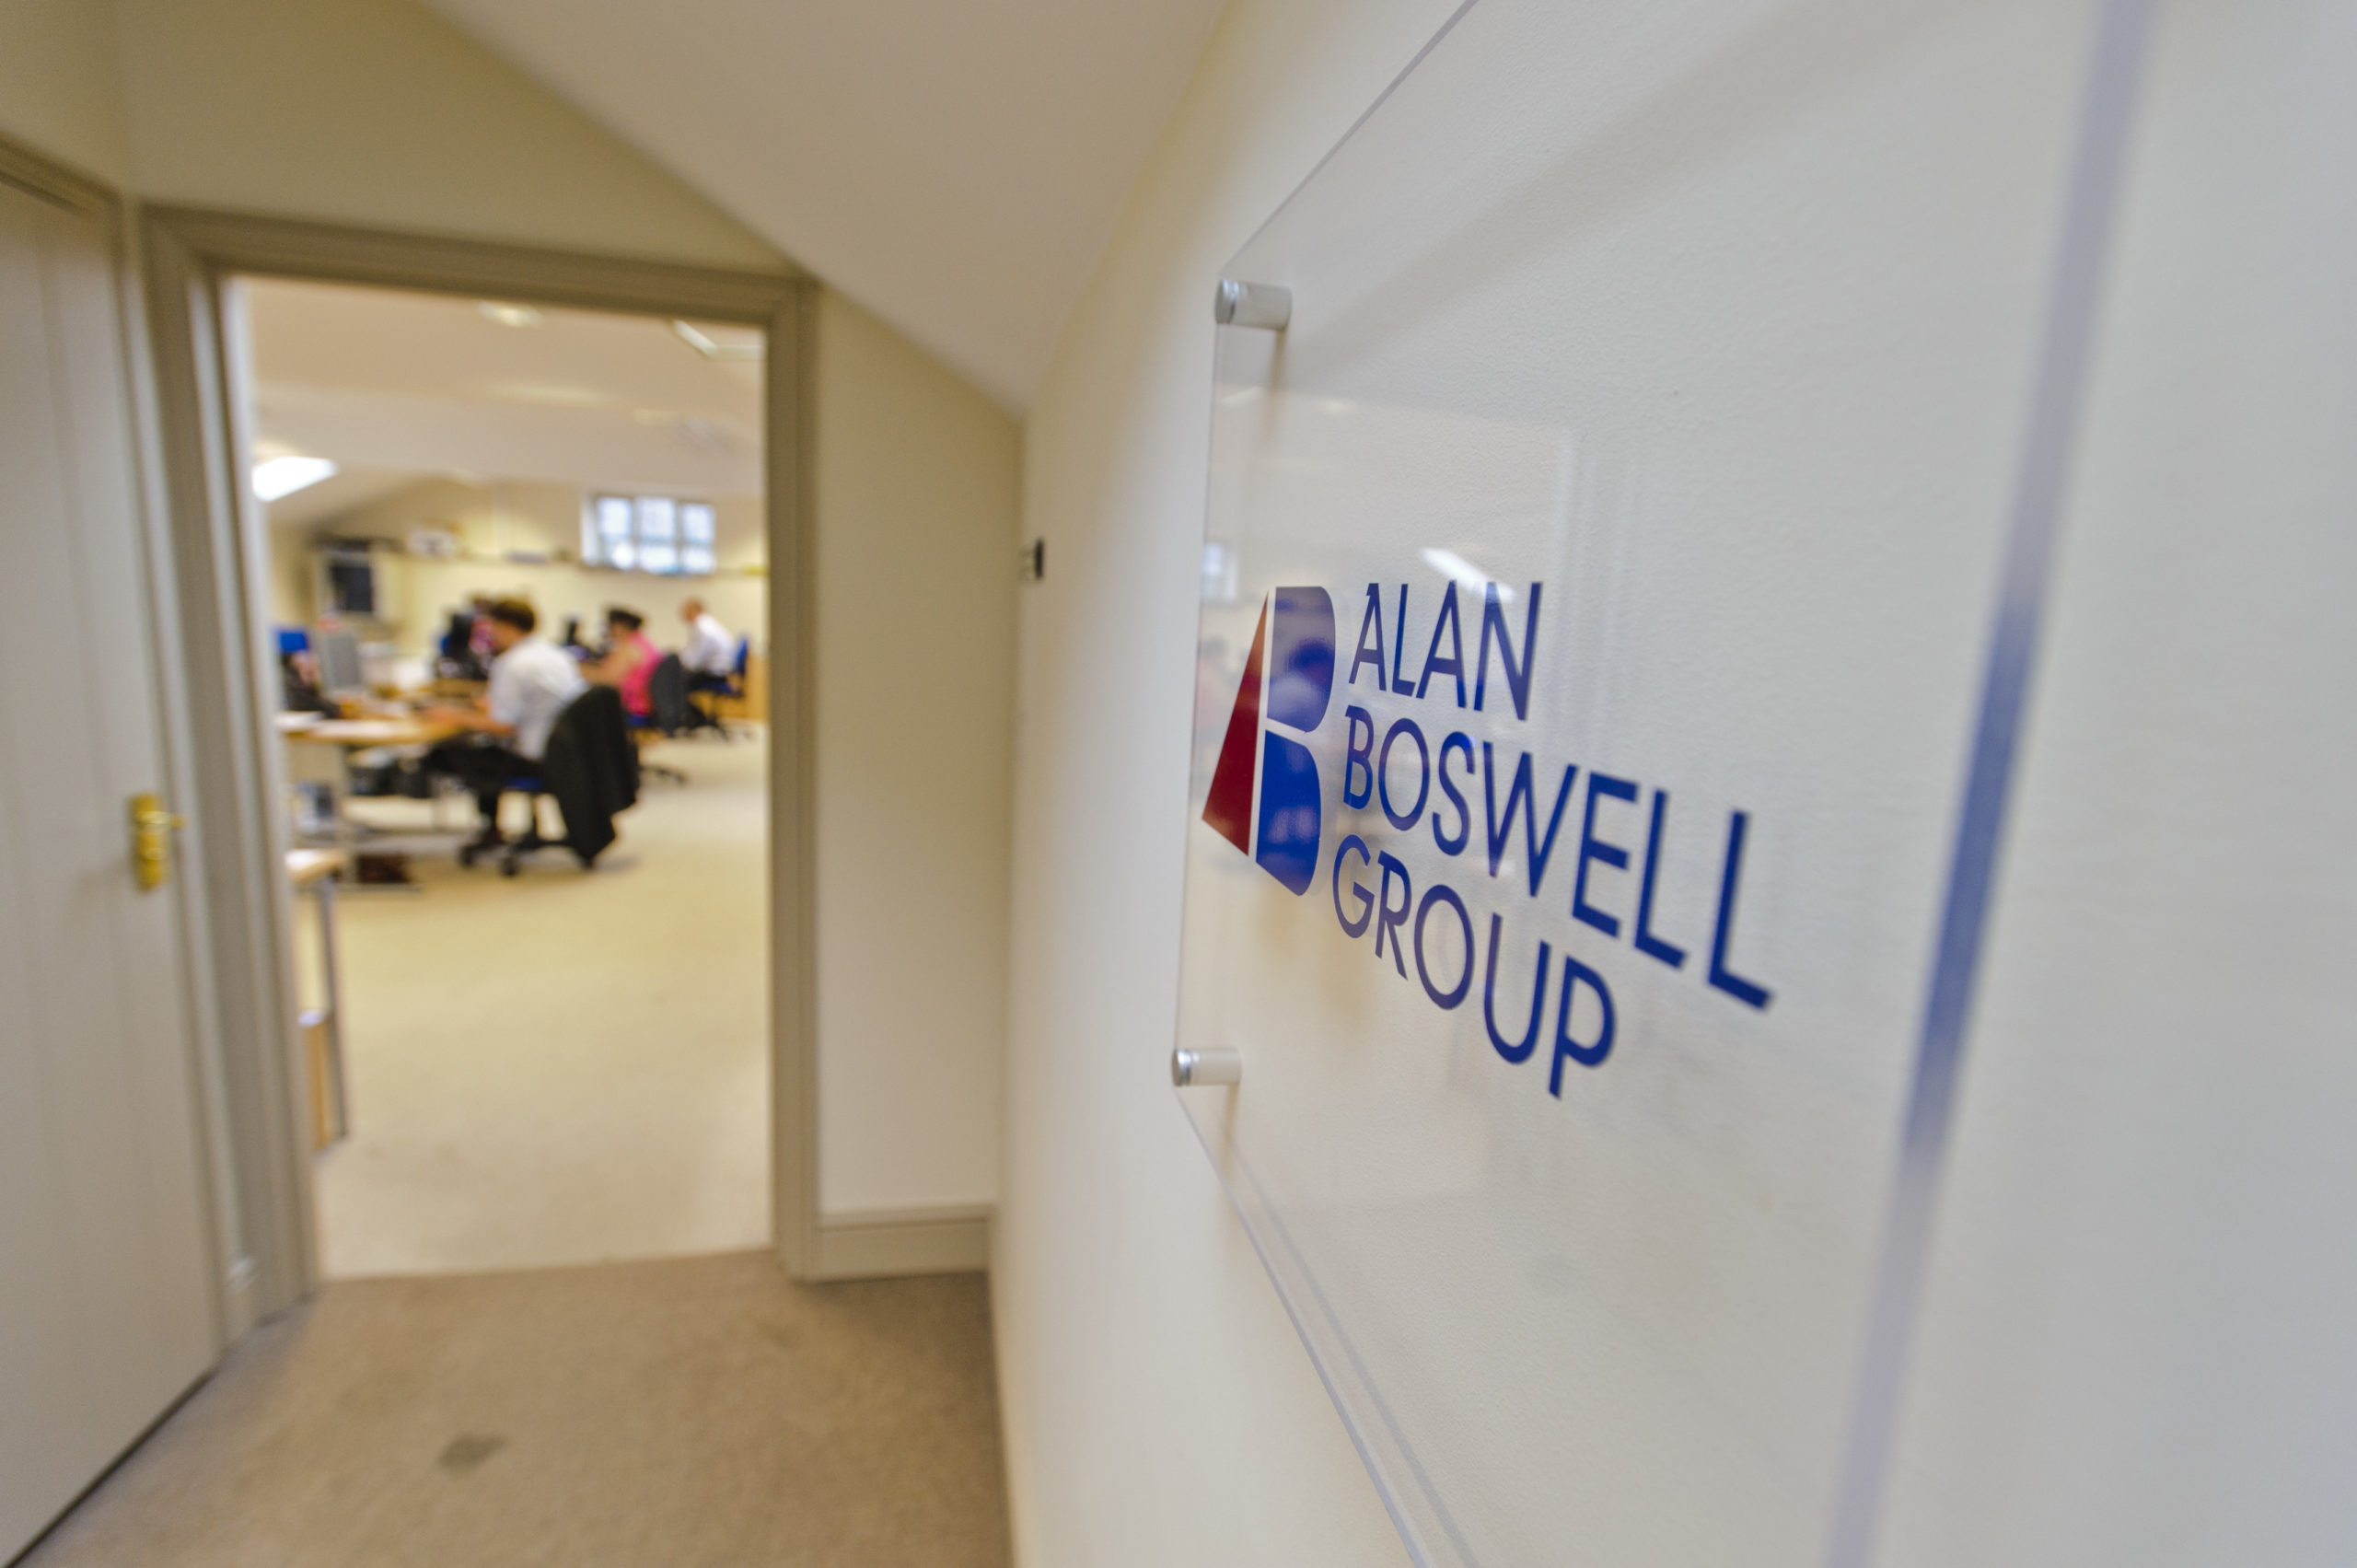 Insurance Brokers in Bury St Edmunds, Suffolk | Alan Boswell Group